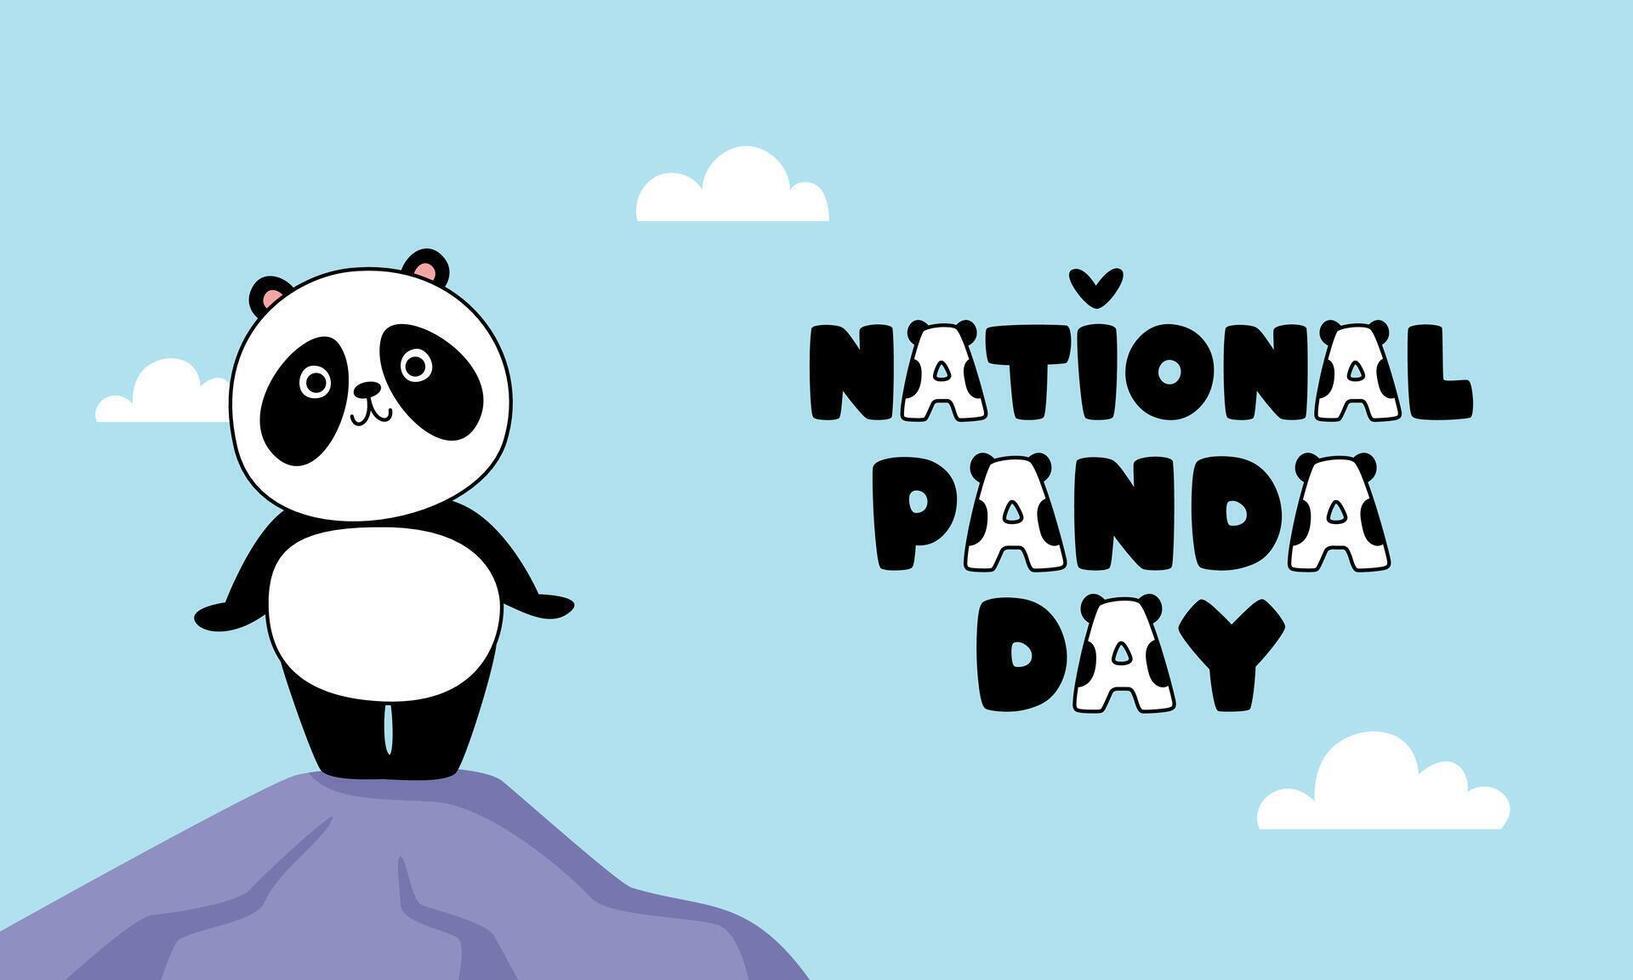 National Panda Day banner, March 16. Cute cartoon panda on top of a mountain in the clouds. With funny text. Vector illustration